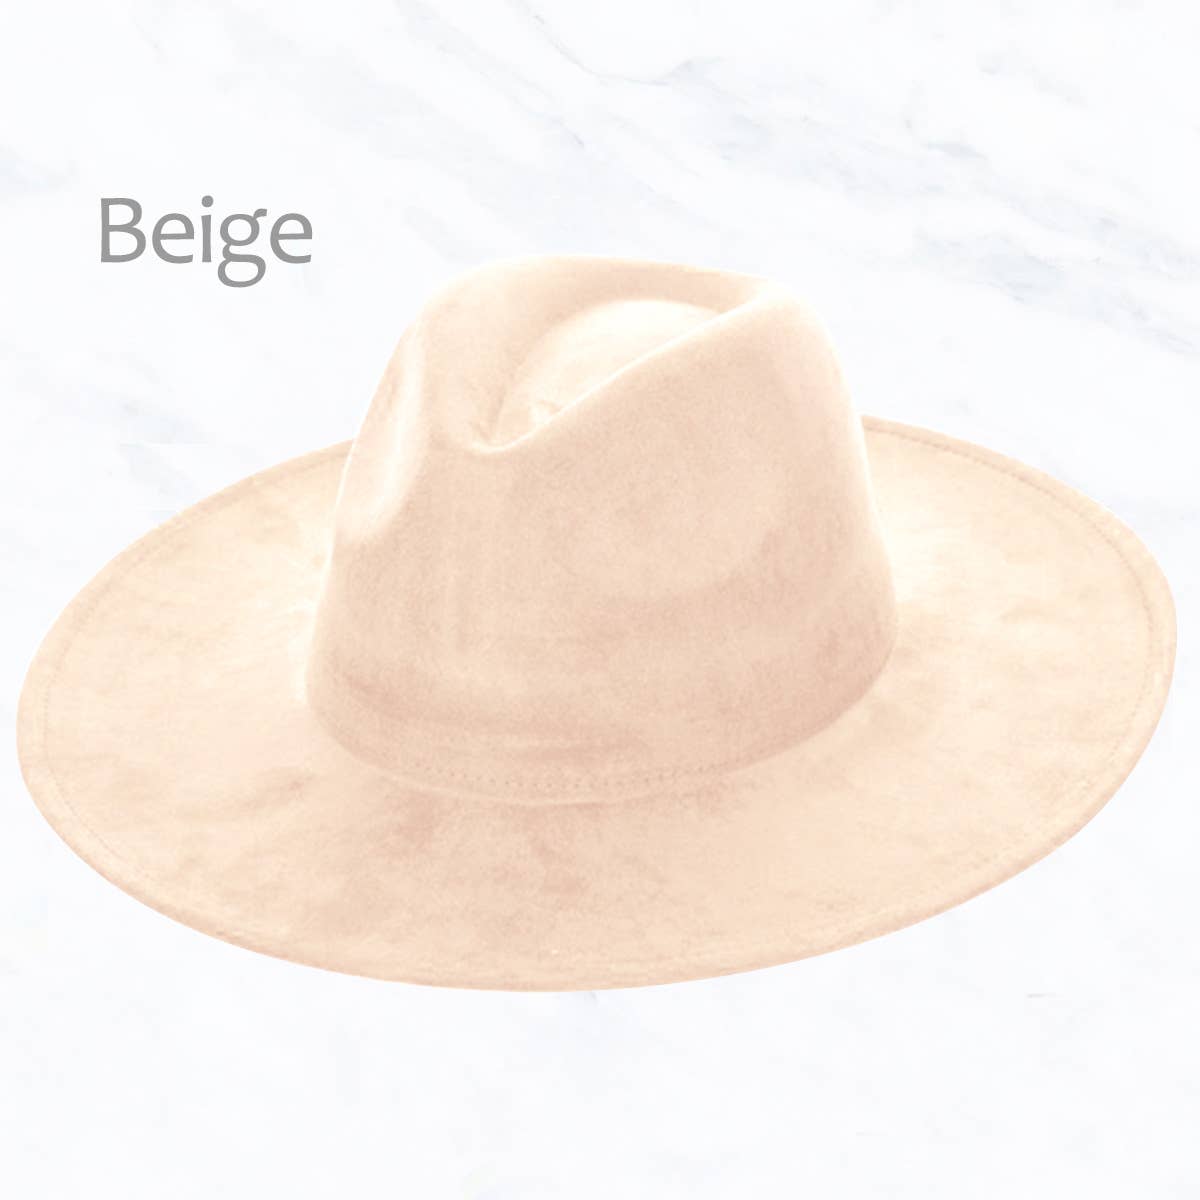 Suzie Q USA - Suede Large Eaves Peach Top Fedora Hat: Dusted Pink